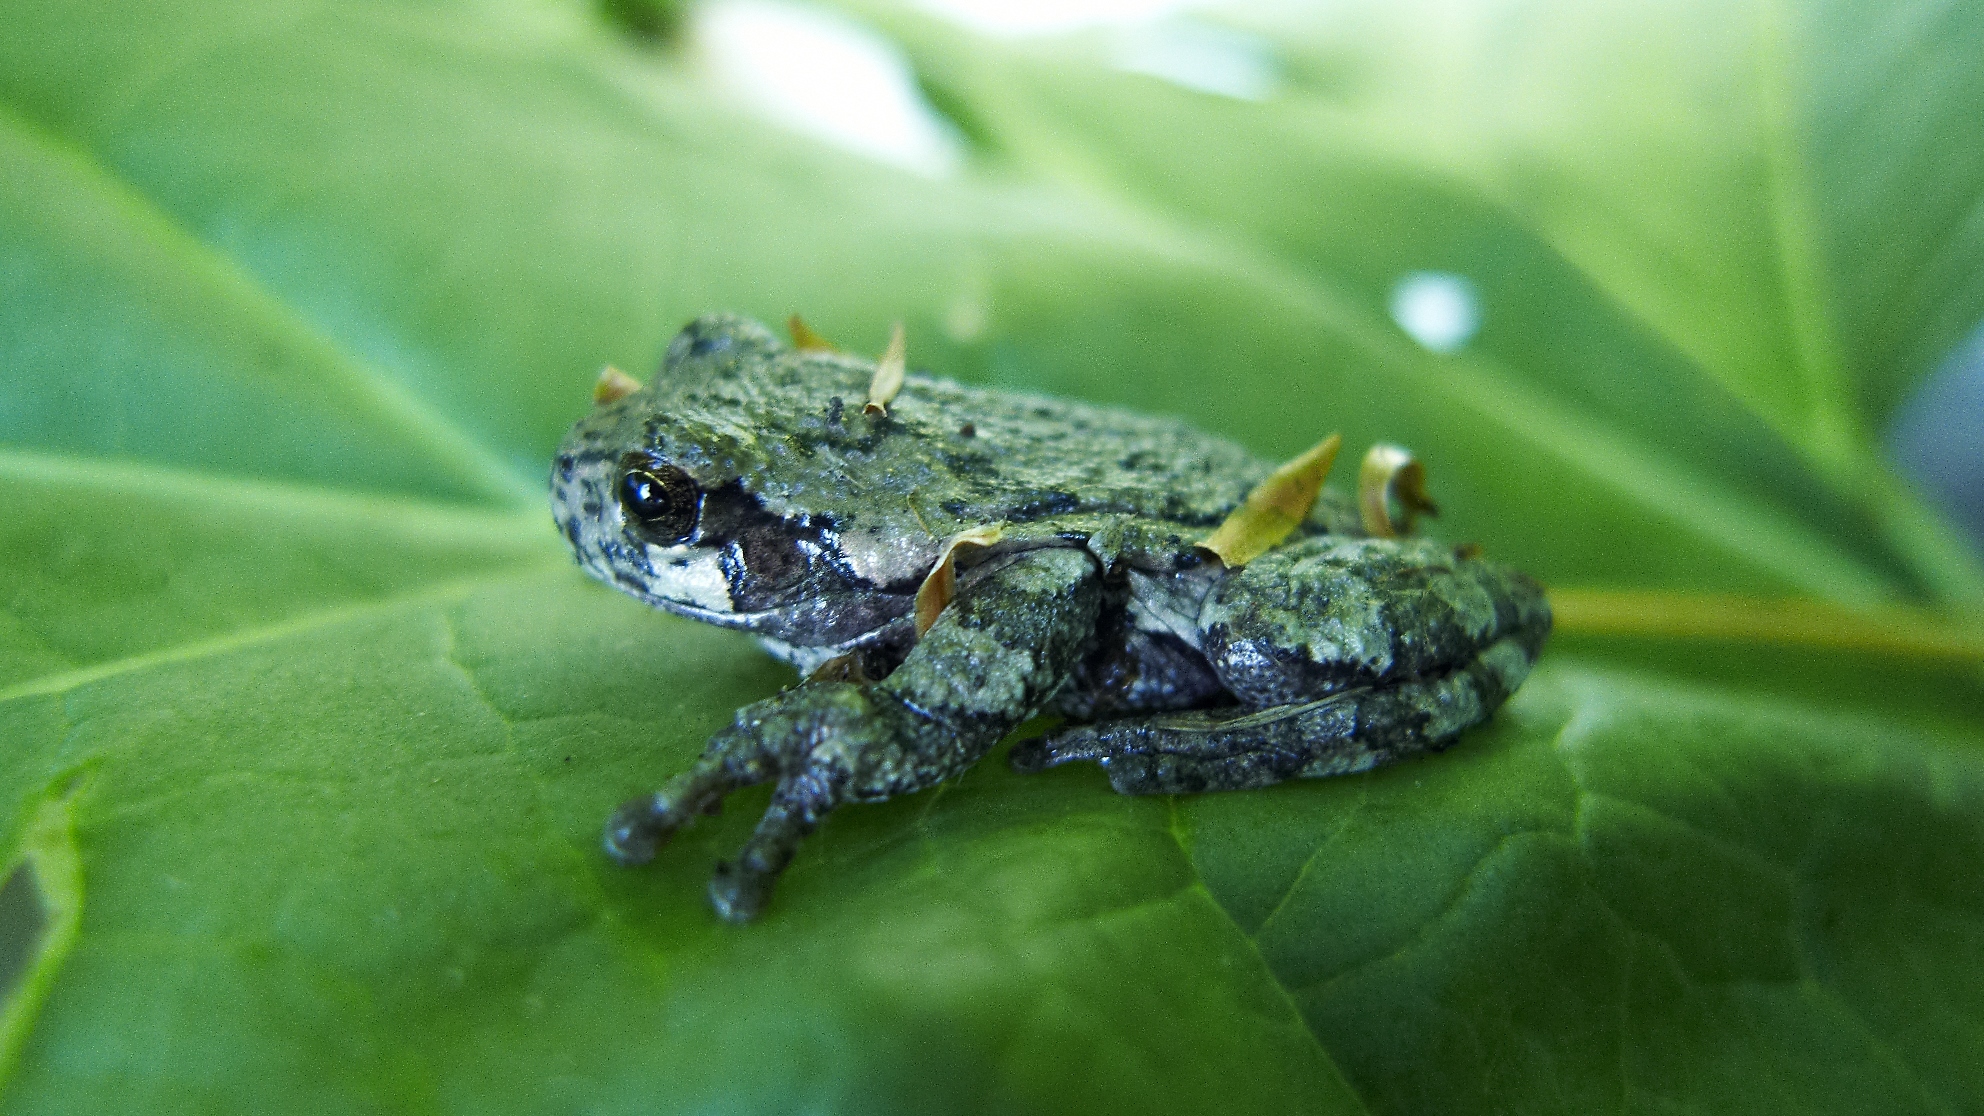 The Michigan DNR and partners monitor Michigan's reptiles and amphibians like this gray tree frog.